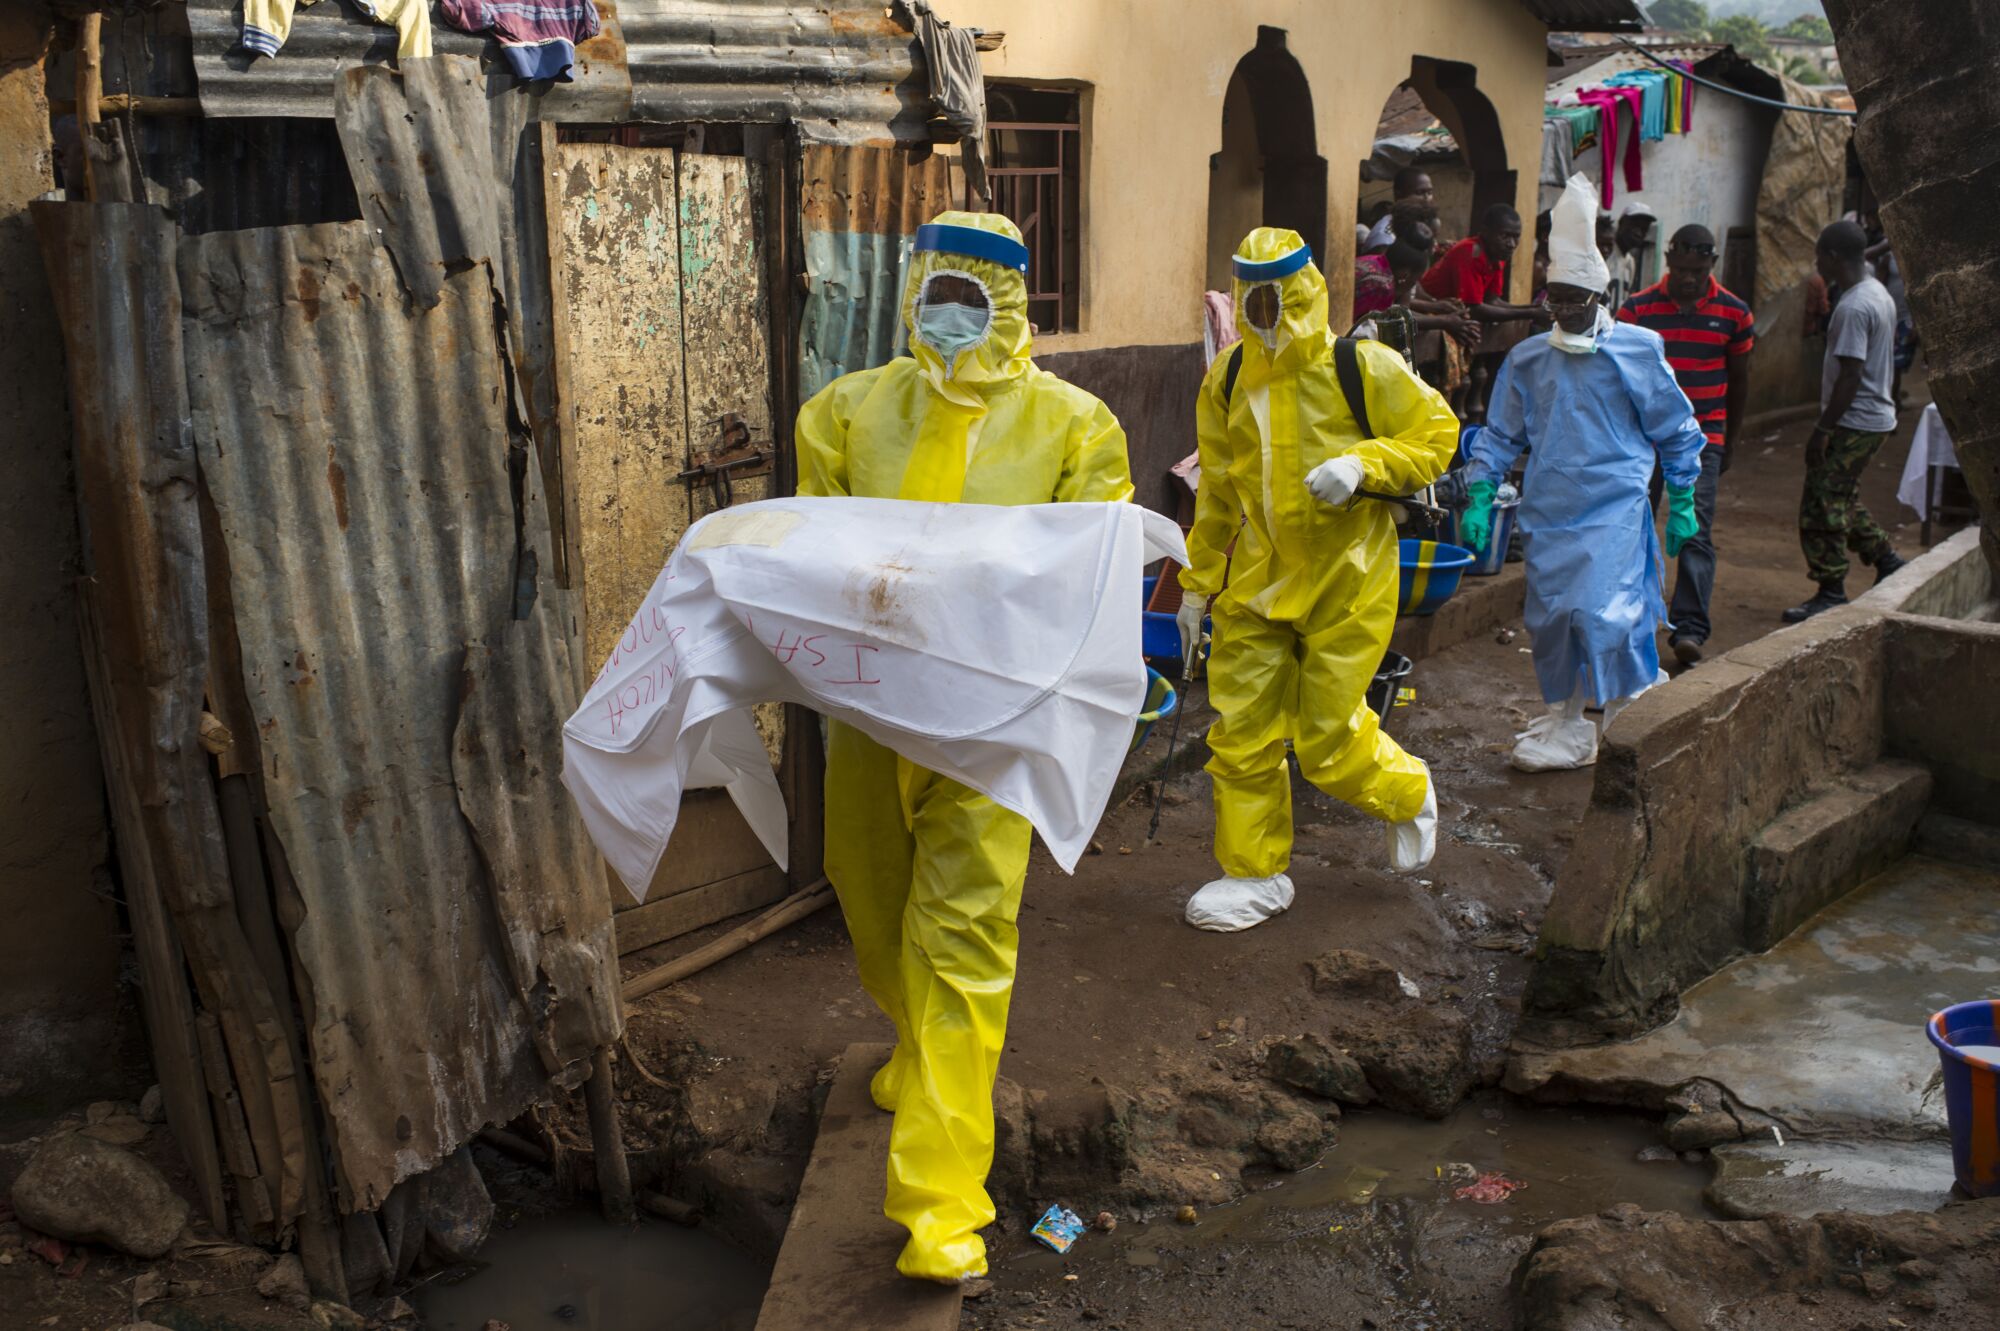 A worker carries the body of a baby, placed in a white bag, in Freetown, Sierra Leone, in 2014. 